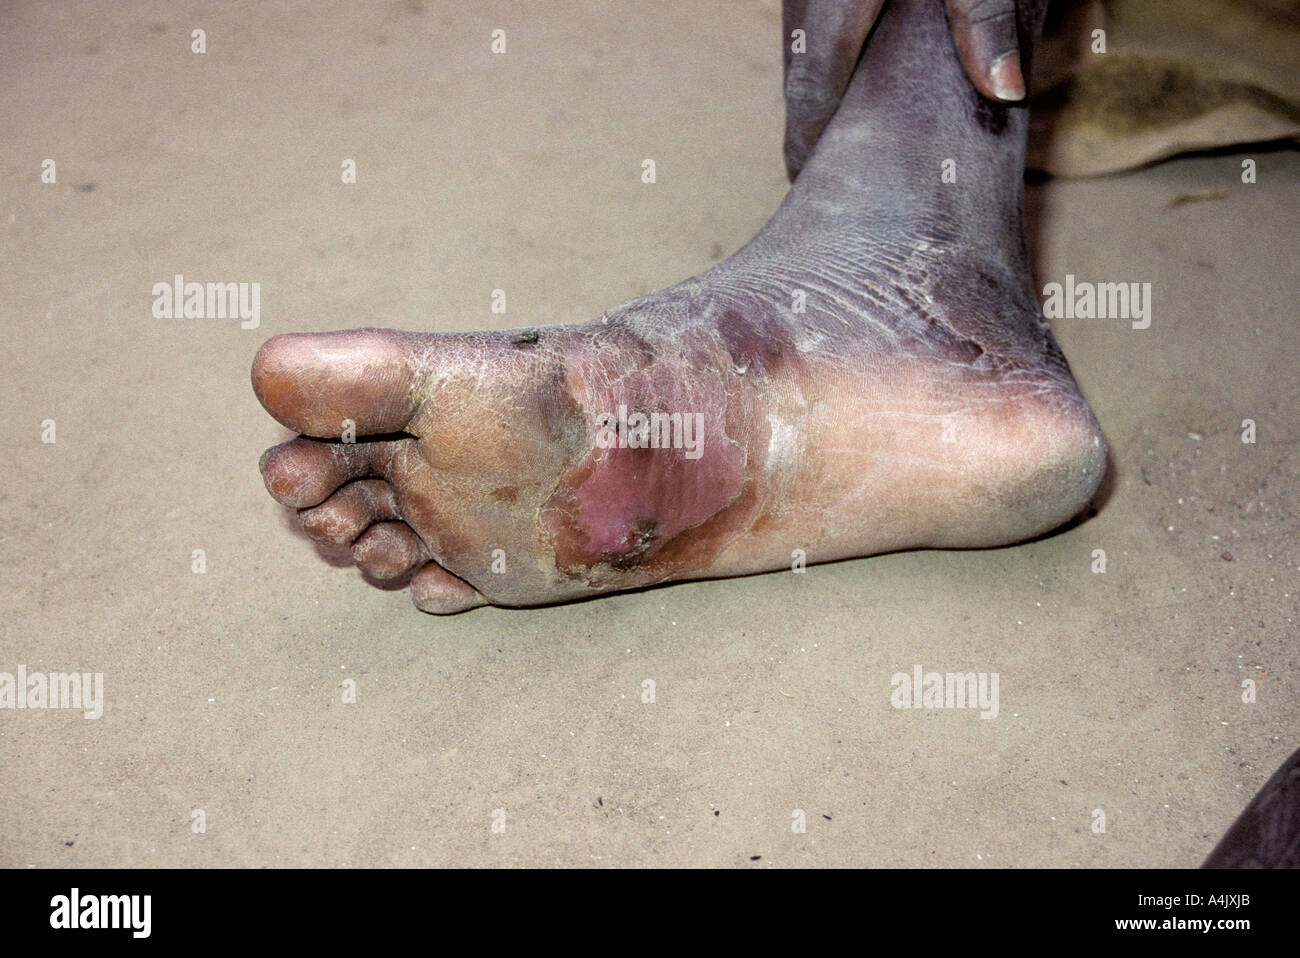 Healing Secondary Infection Where Guinea Worm has Exited. Stock Photo